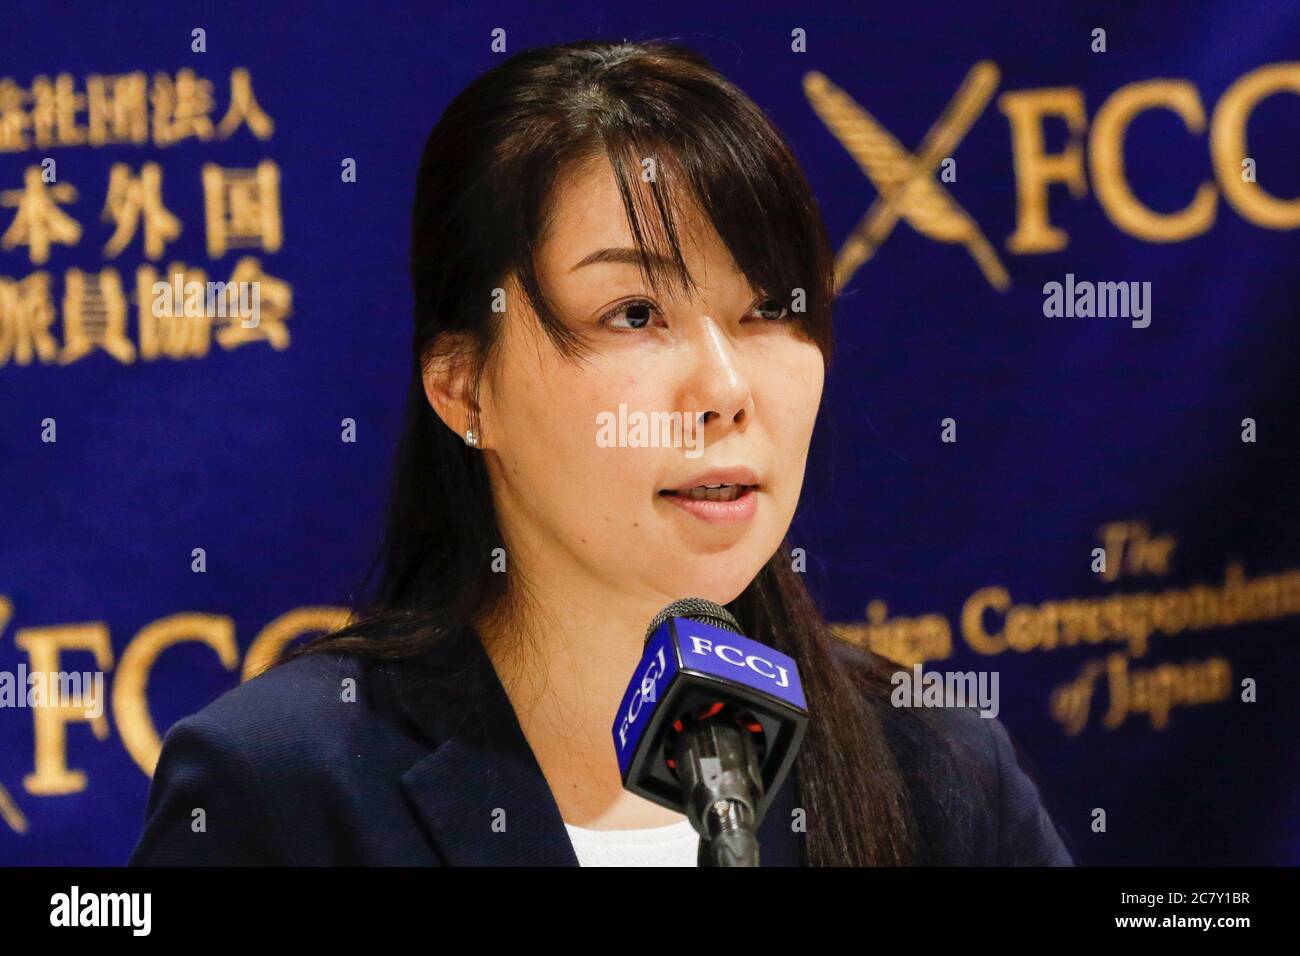 Kaori Kohga head of the Nightlife Business Association speaks during a news conference at The Foreign Correspondents' Club of Japan (FCCJ) on July 20, 2020, Tokyo, Japan. Kohga, who is representing hostess workers and clubs across Japan, came to the Club alongside Dr. Shinya Iwamuro to talk about the challenges of nightlife workers amid coronavirus pandemic, in which recent infection cases have been rises among people in their 20s and 30s. Credit: Rodrigo Reyes Marin/AFLO/Alamy Live News Stock Photo